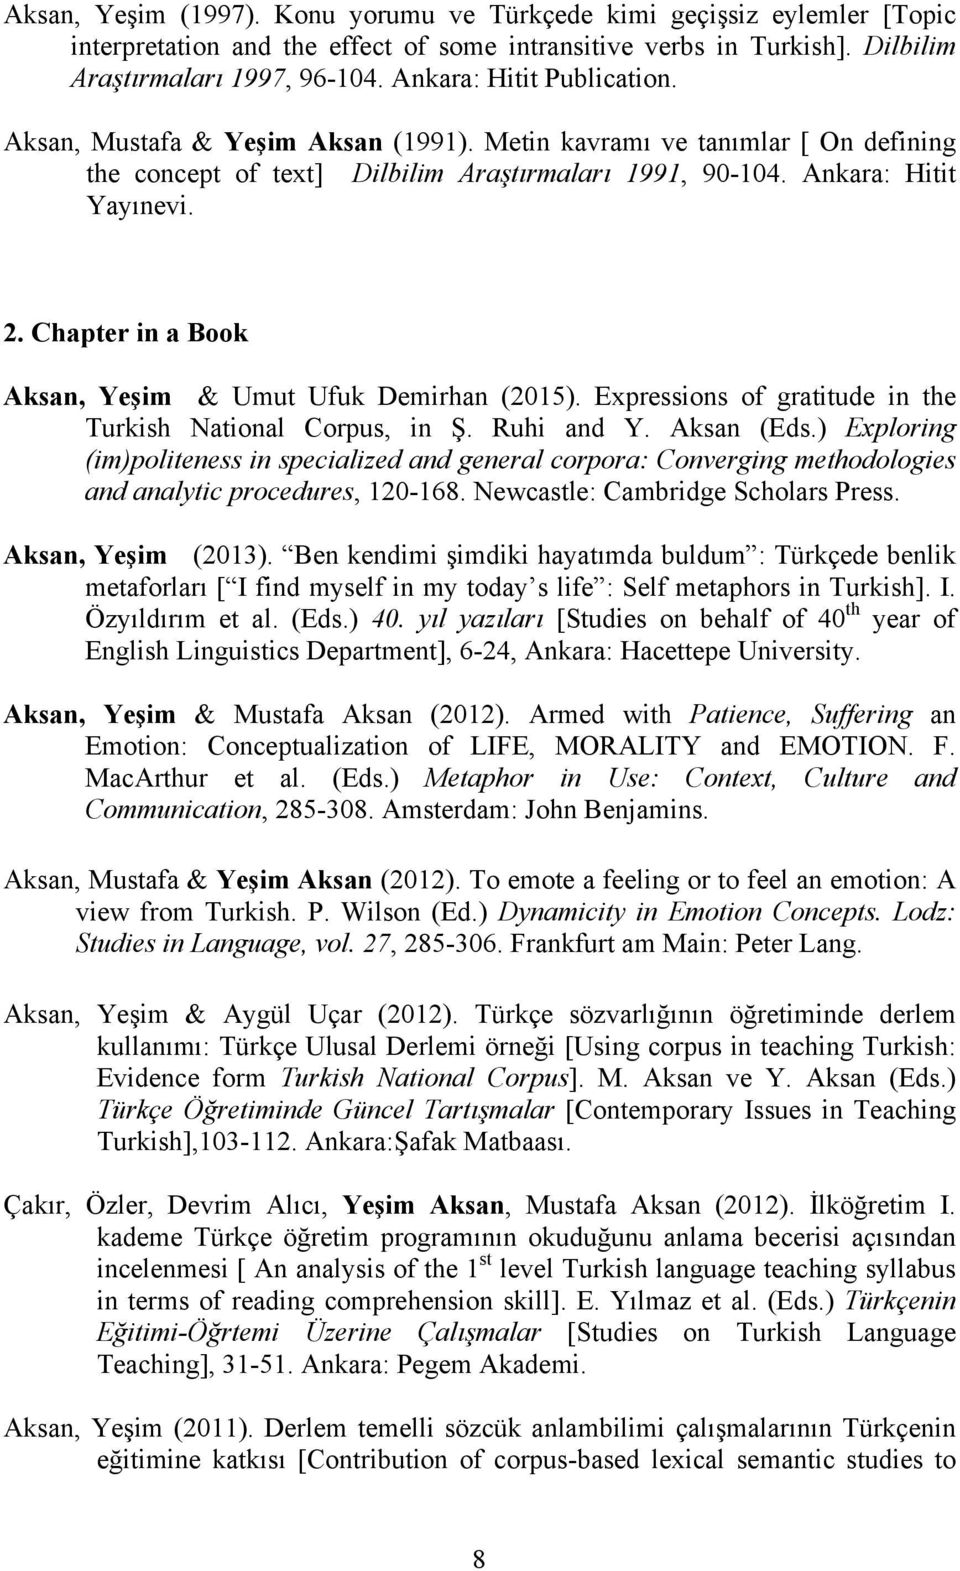 Chapter in a Book Aksan, Yeşim & Umut Ufuk Demirhan (2015). Expressions of gratitude in the Turkish National Corpus, in Ş. Ruhi and Y. Aksan (Eds.